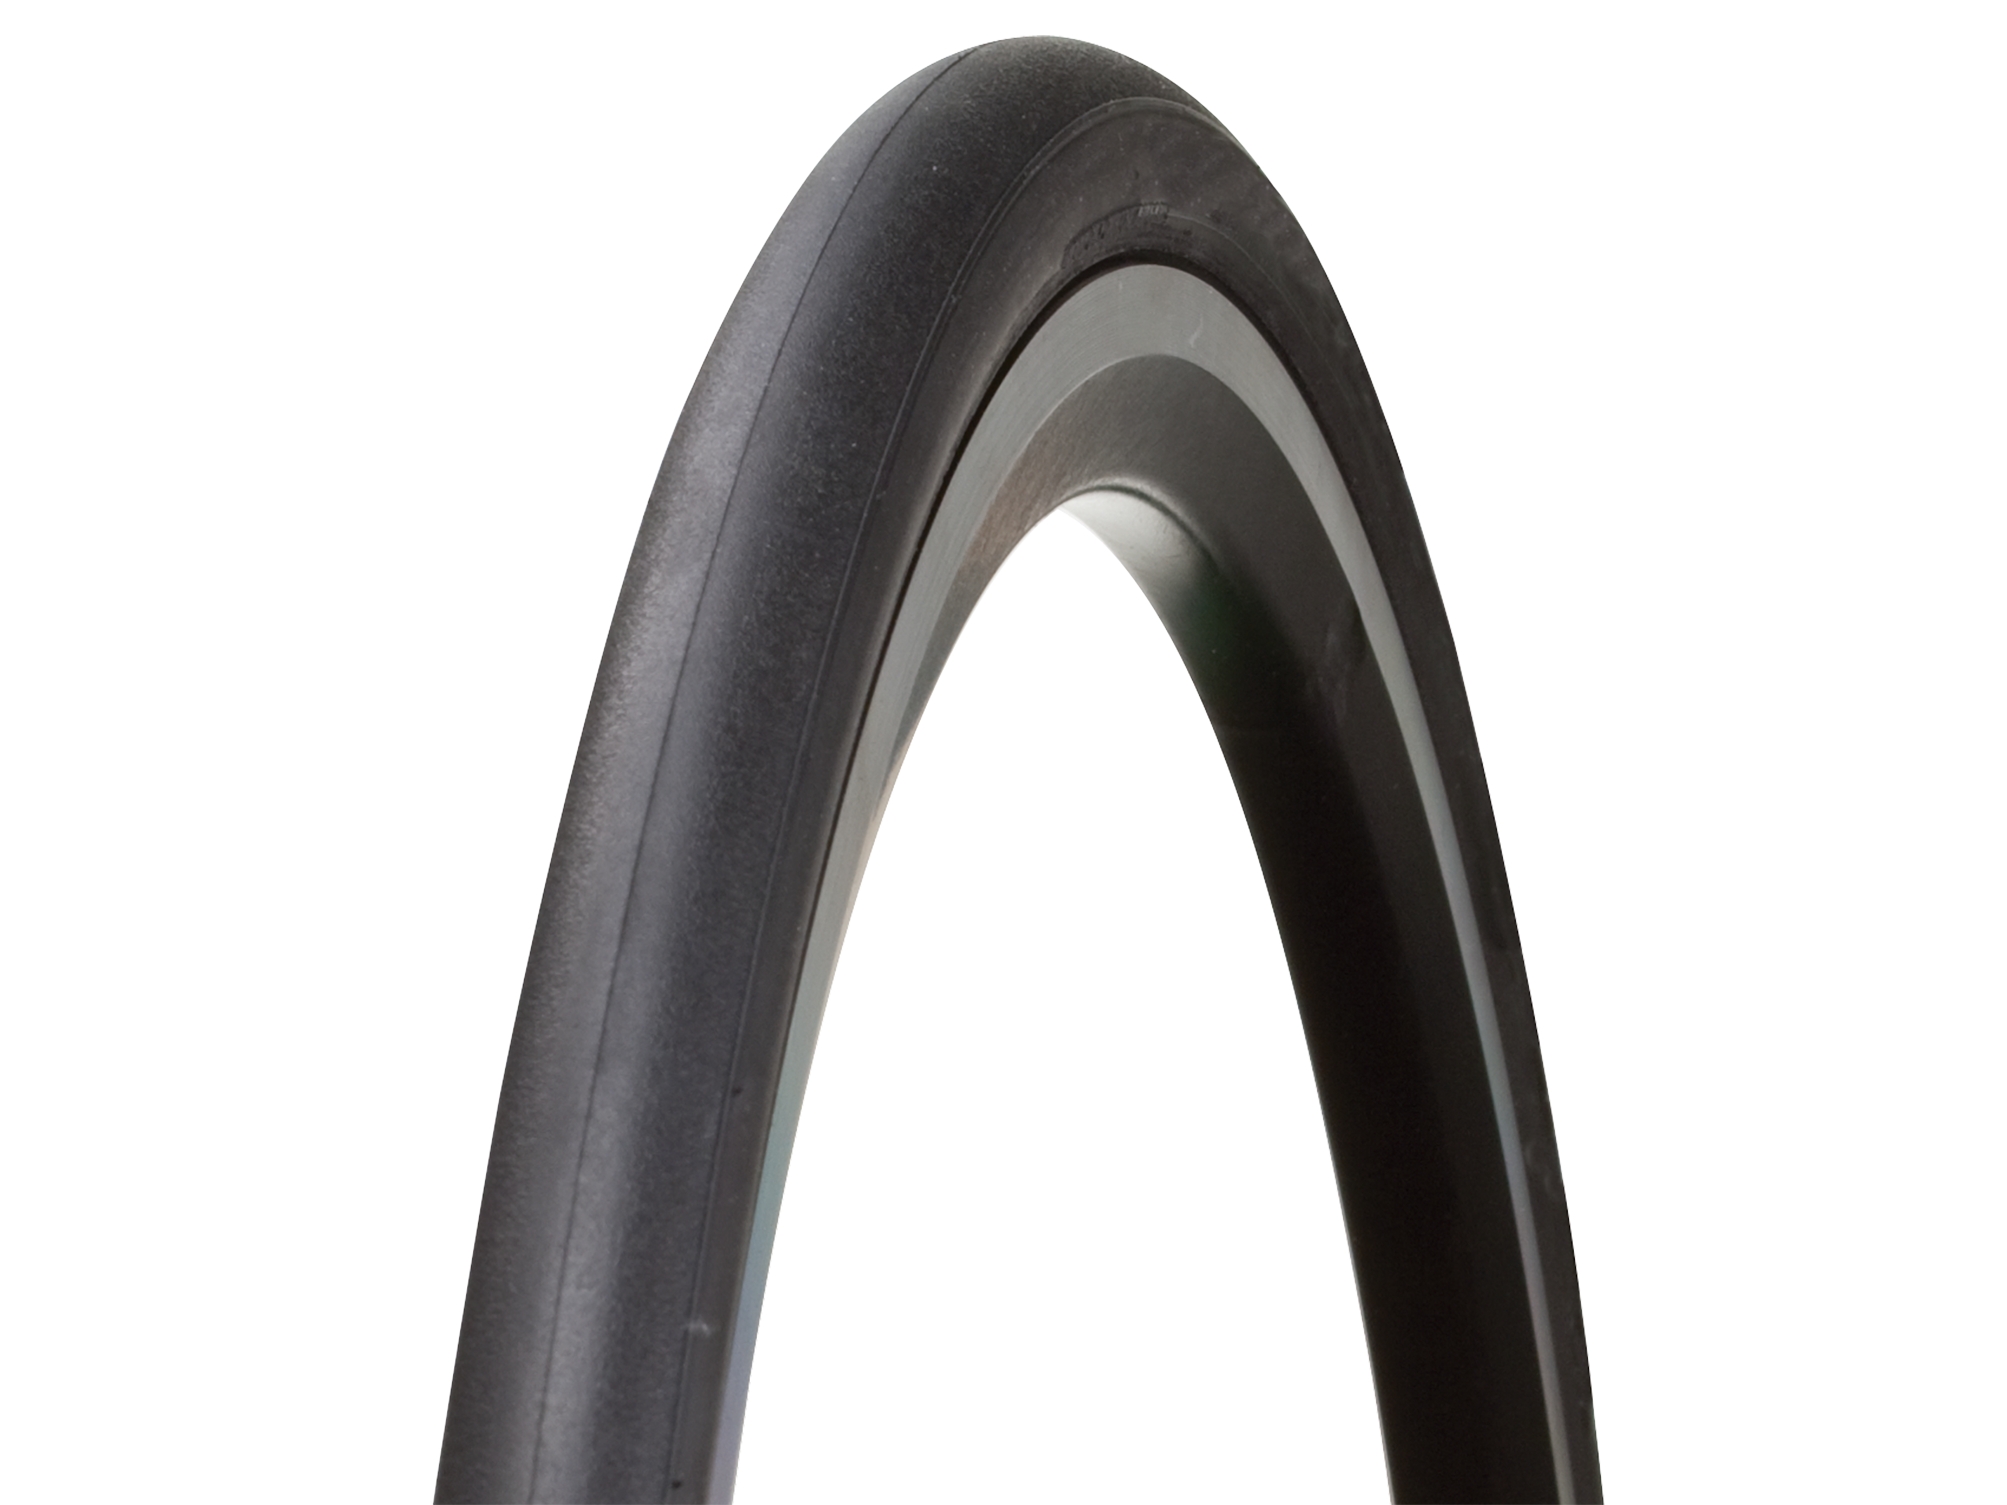 tubeless ready road tires